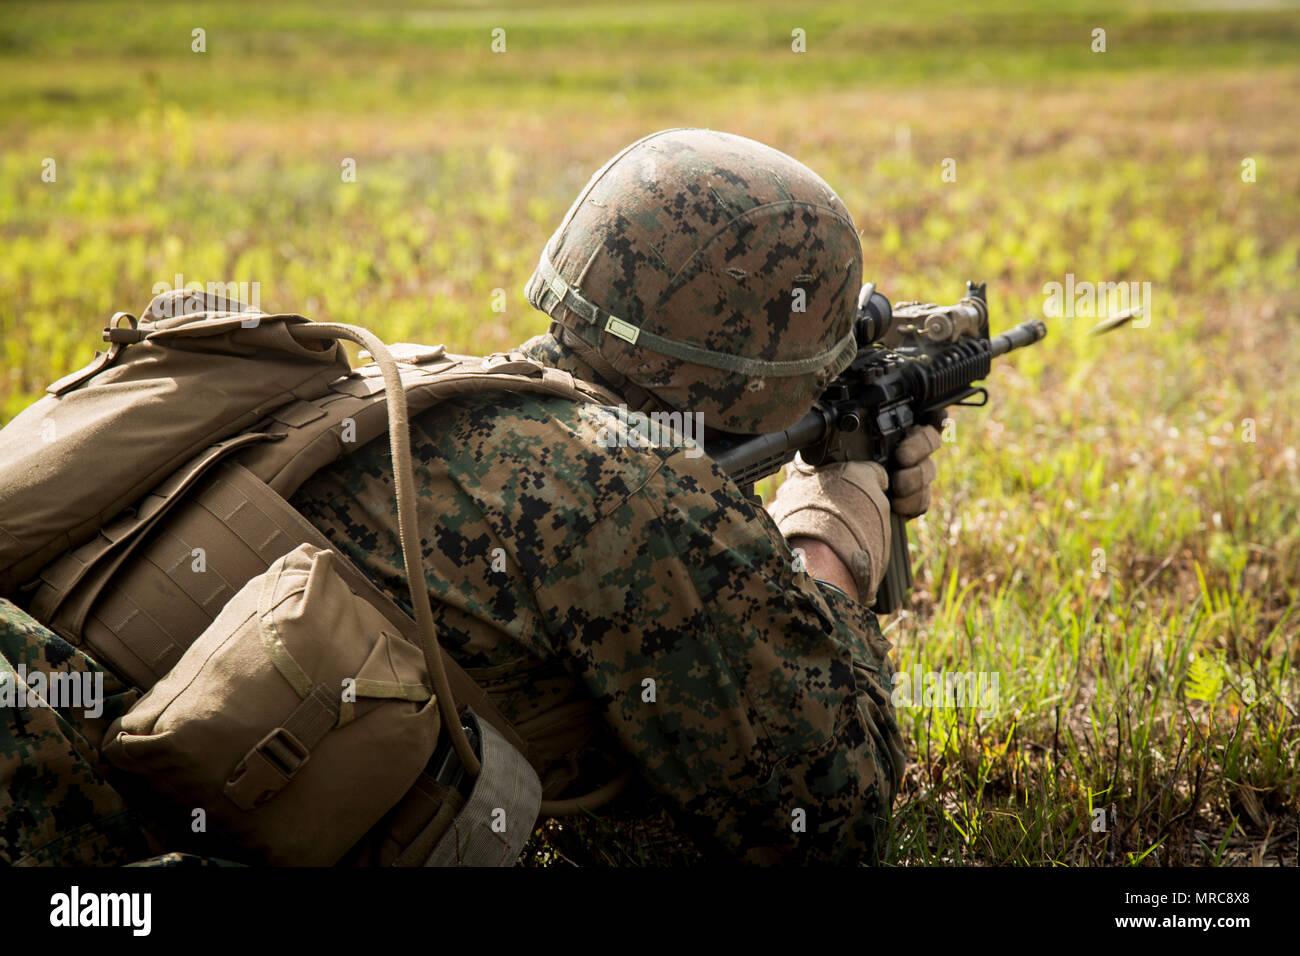 A U.S. Marine attached to Advanced Infantry Training Battalion, School of Infantry-East (SOI-E), fires an M4A1 carbine during a combined arms exercise at Camp Lejeune, N.C., April 7, 2017. The mission of SOI-E is to train entry-level and advanced level Marines in the skills required of an Infantry Marine for the operating forces. (U.S. Marine Corps photo by Cpl. Manuel Serrano) Stock Photo